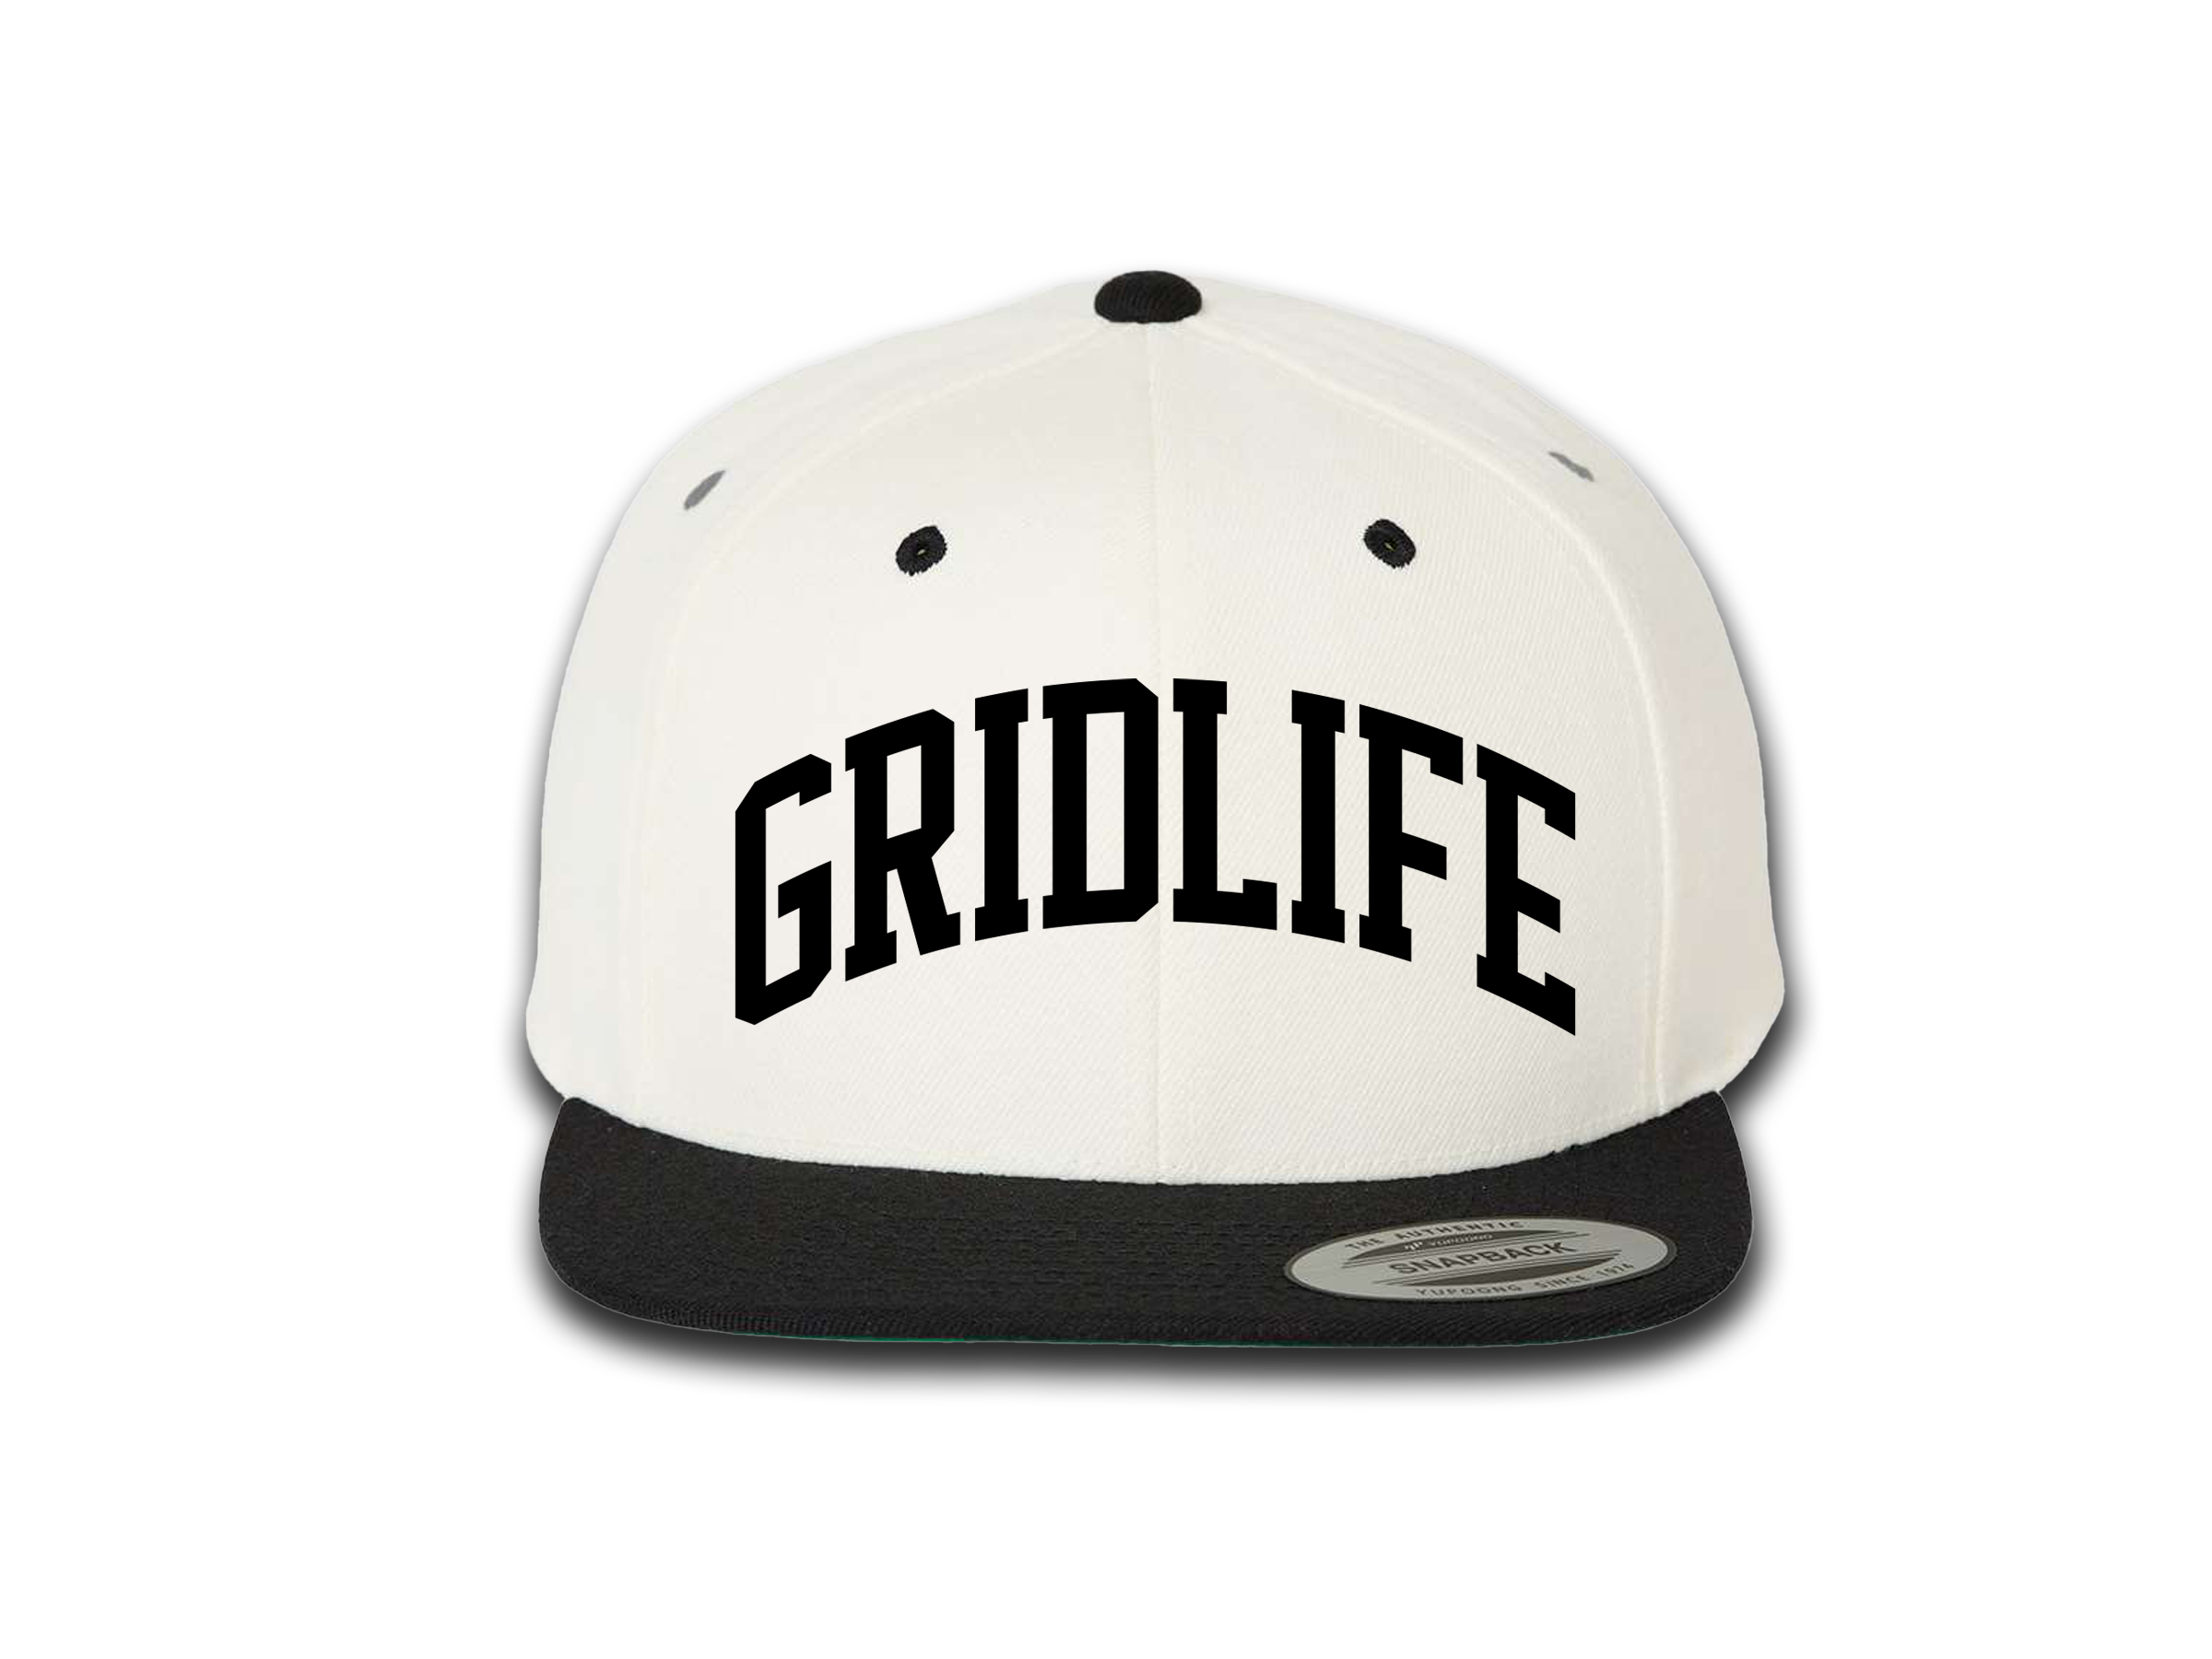 Stock image showing GRIDLIFE college style hat